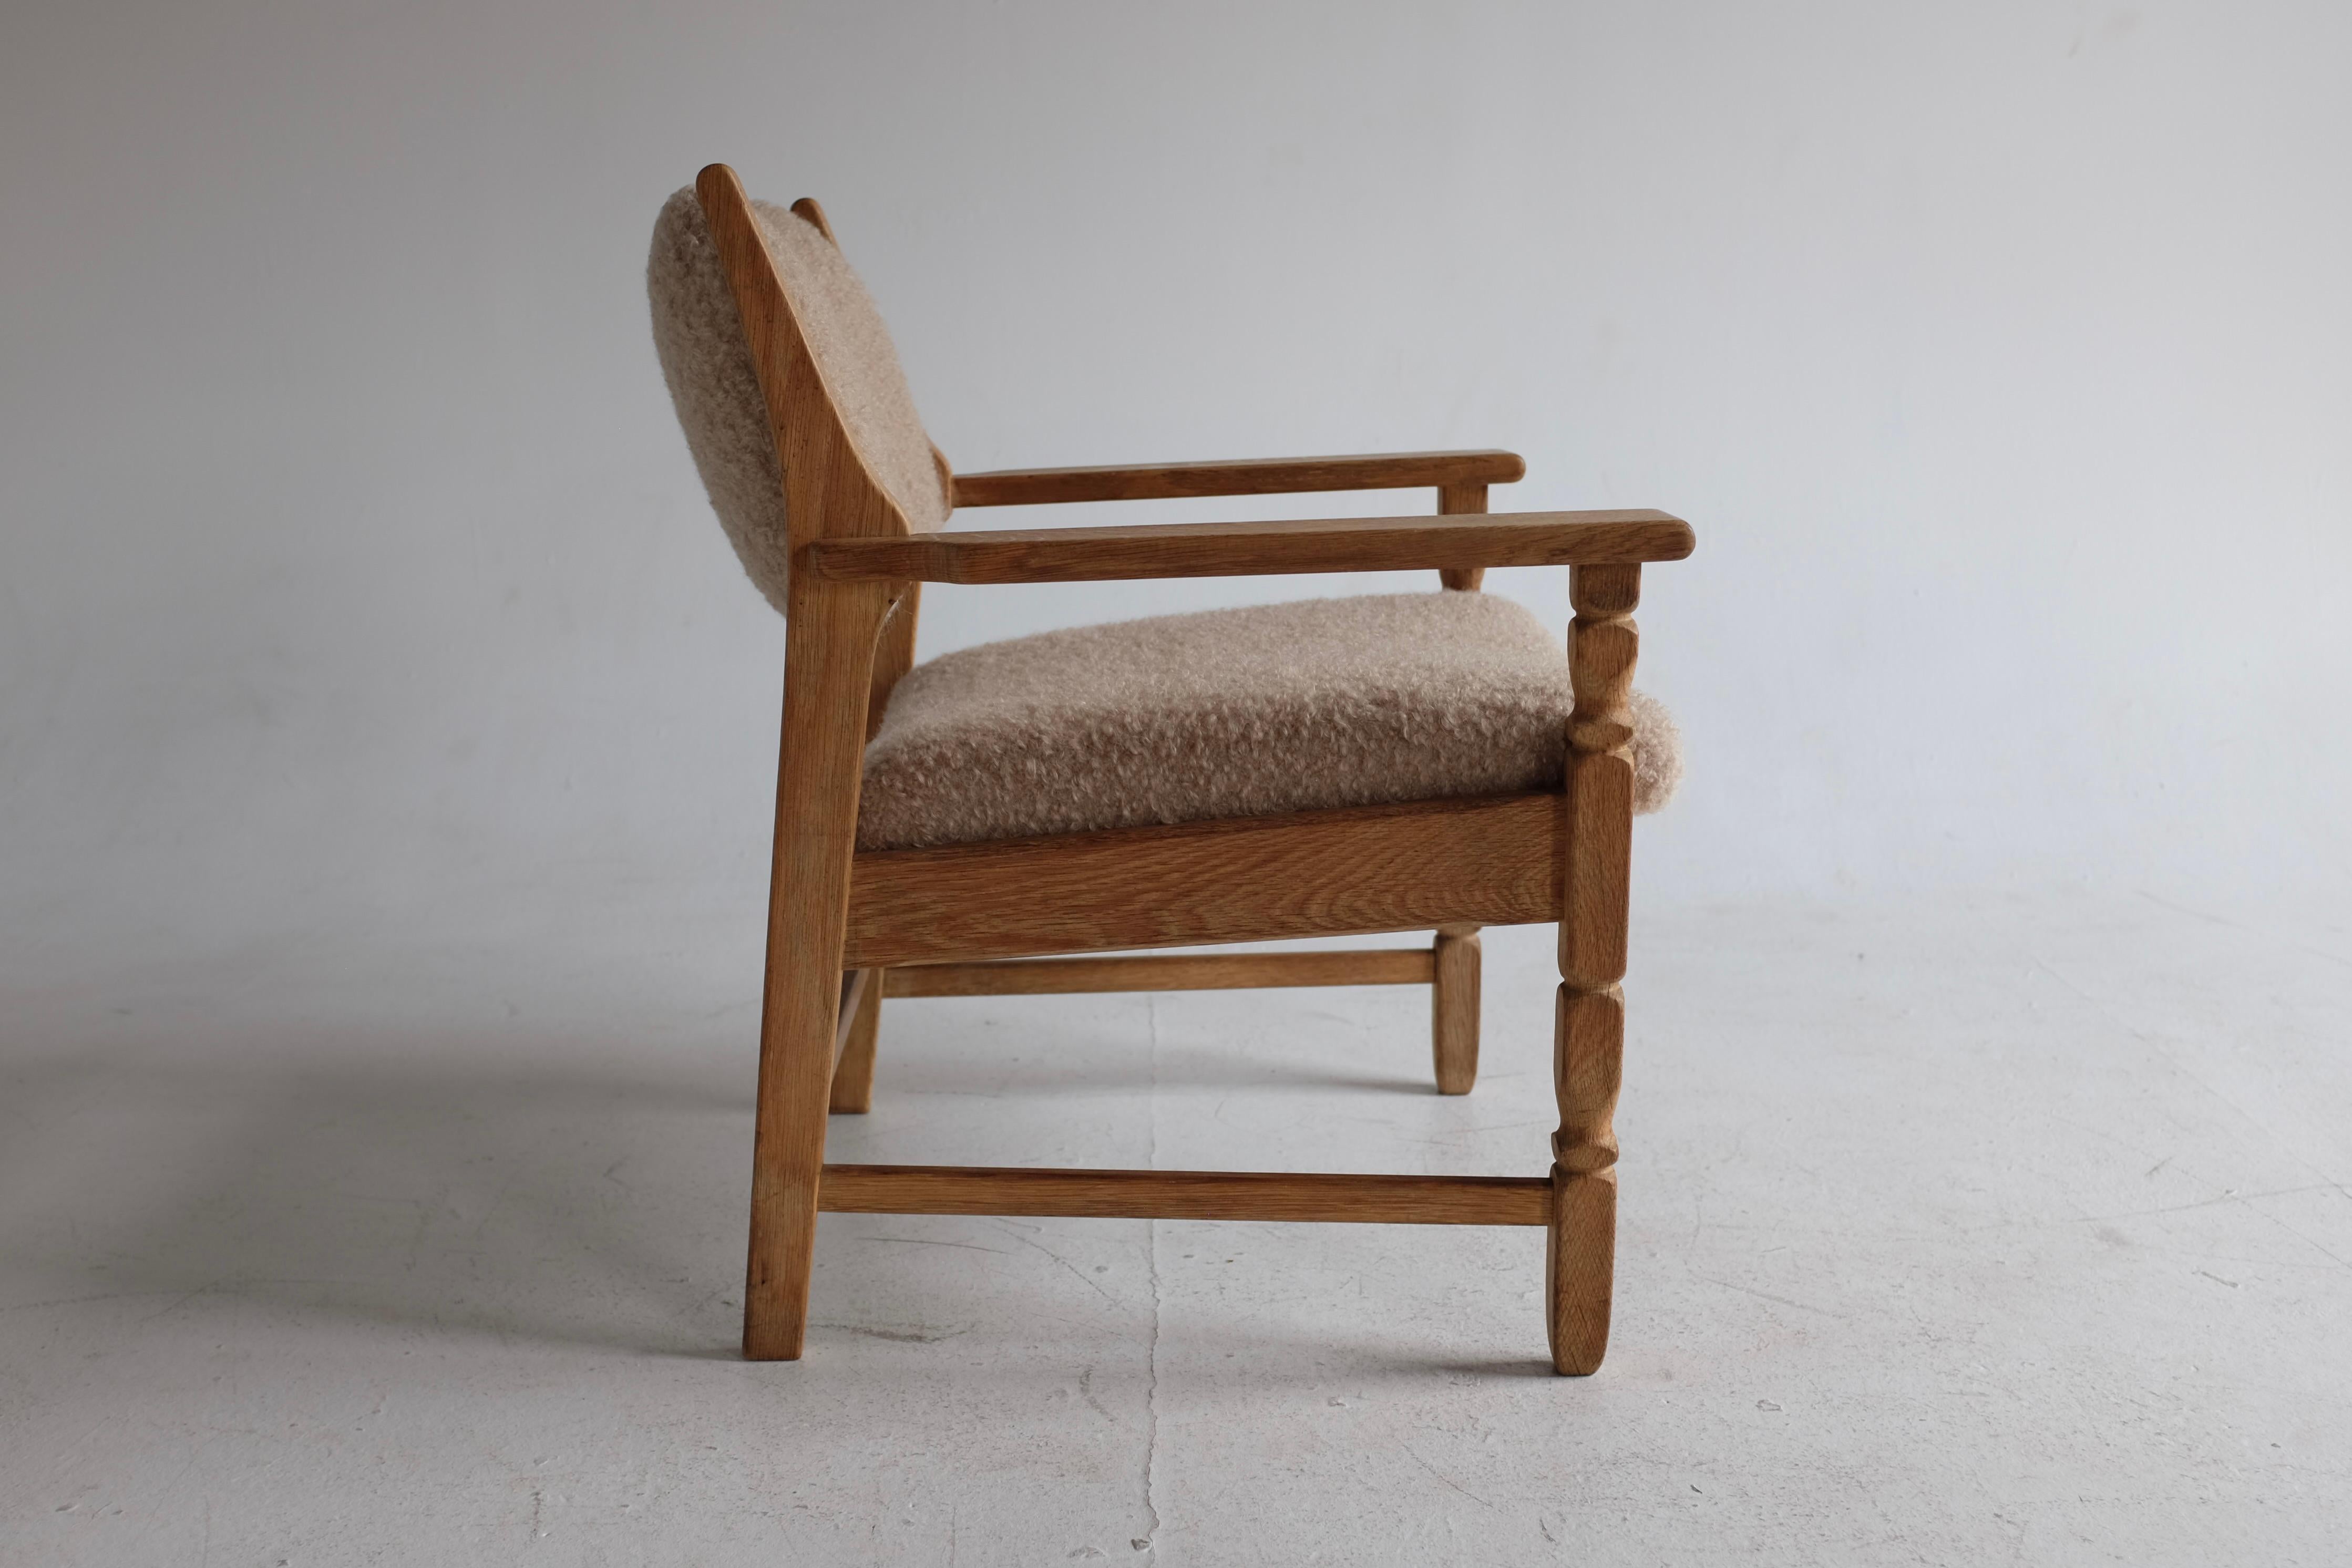 Vintage Henning Kjærnulf Oak Chair newly upholstered in Schumacher Teddy Boucle. Known for his distinctive style mixing mid-century with rustic elements the Razor Blade chair is on of Henning Kjærnulf best known designs. On this version the back is